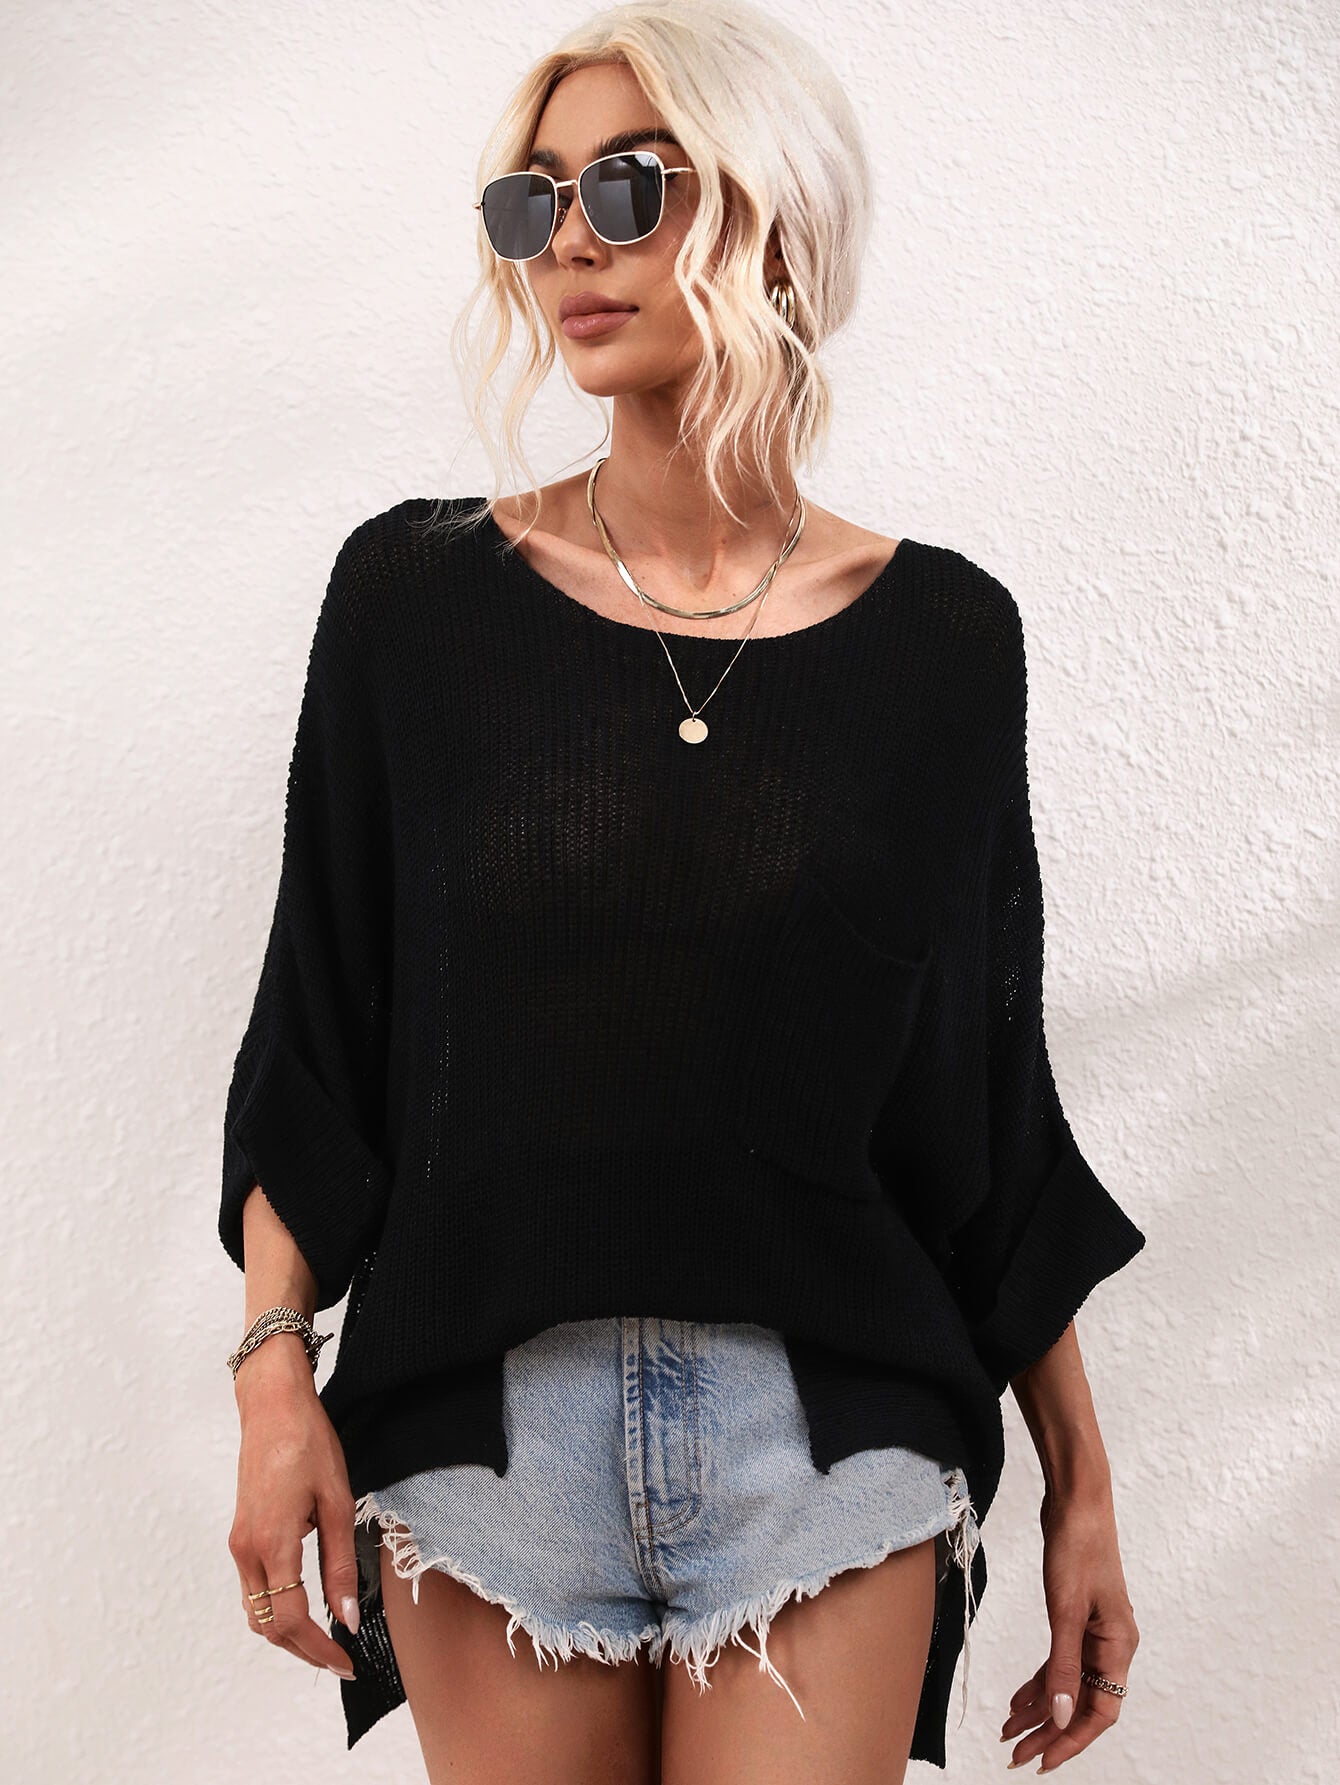 Black Knit Tunic Tops Tops for Women